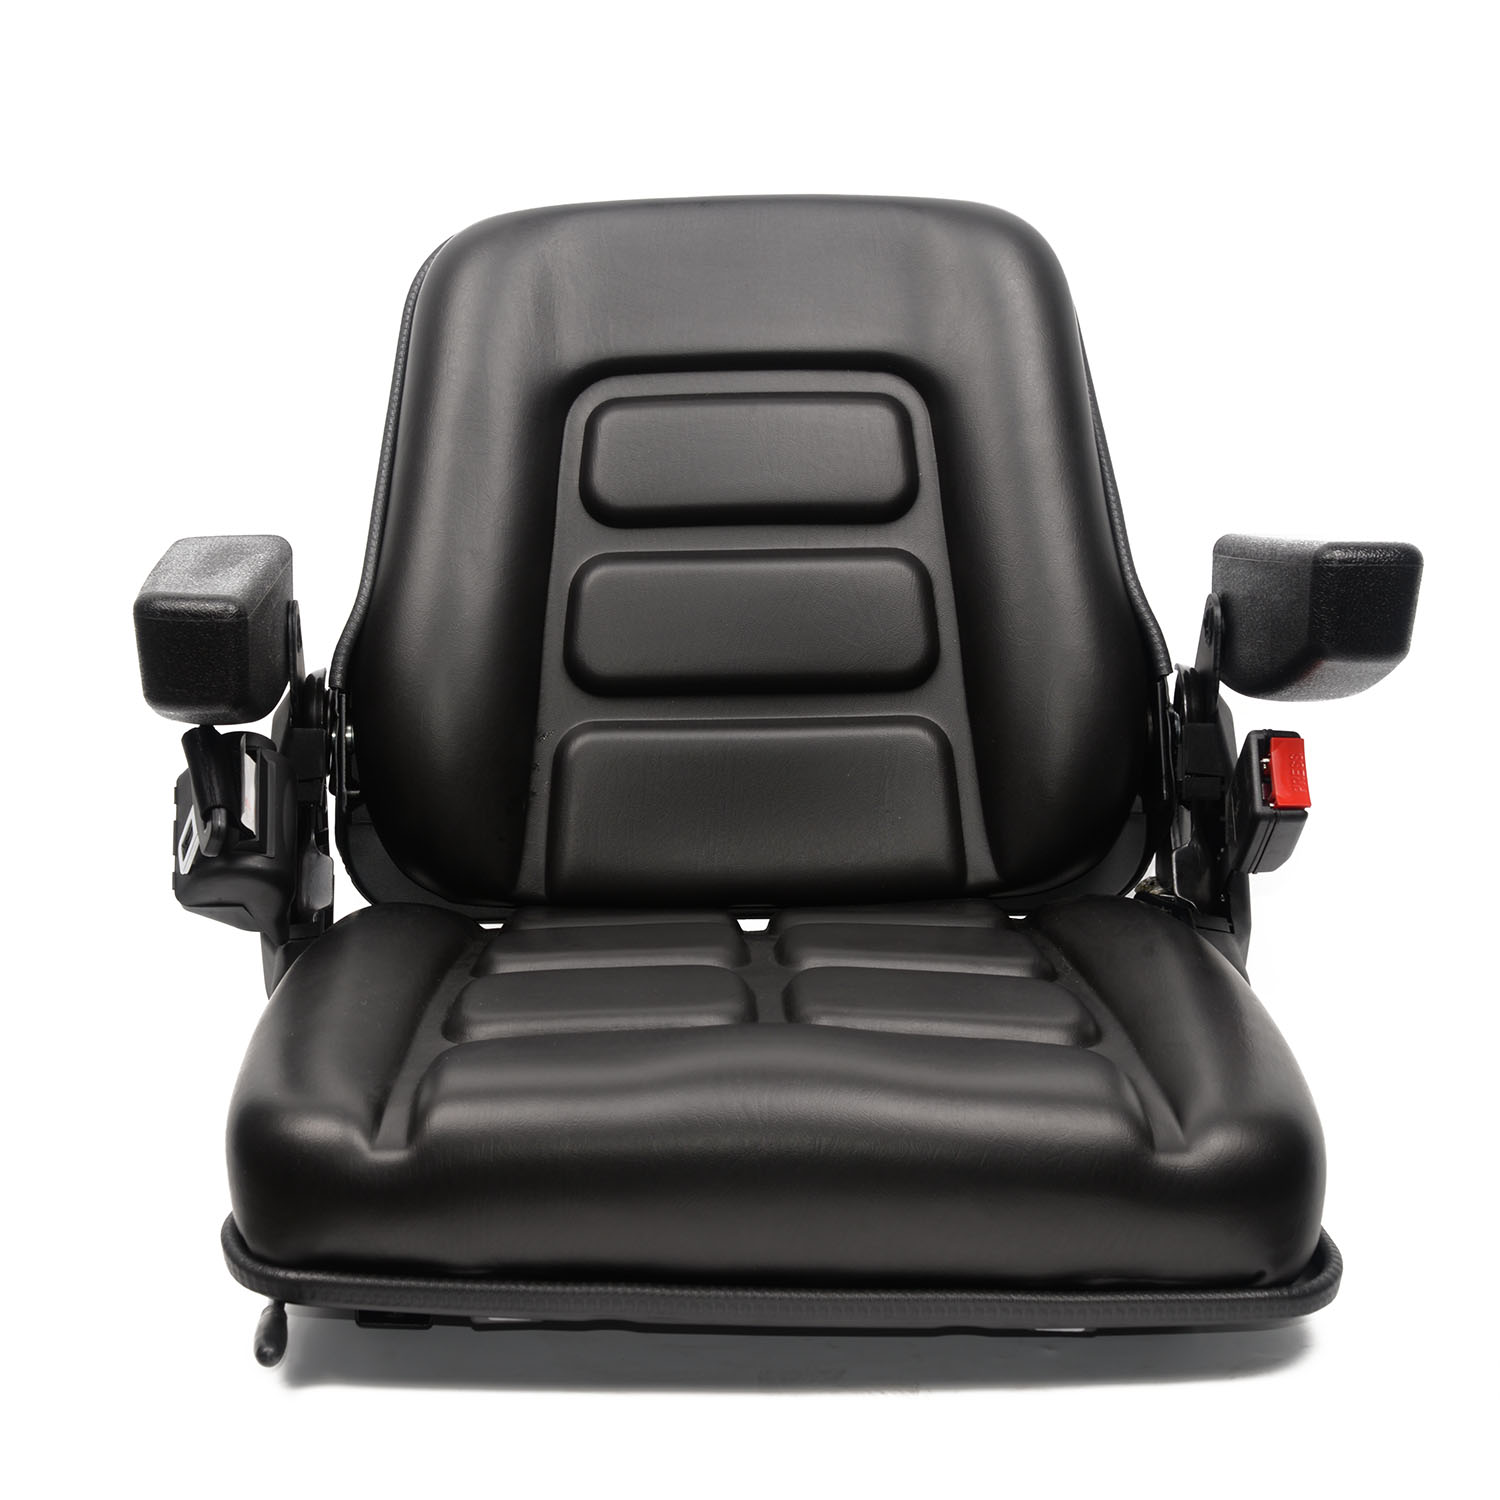 Aftermarket Universal Adjustable Forklift Seat with Safety Belt, Full Suspension Seat with foldable cushion Featured Image